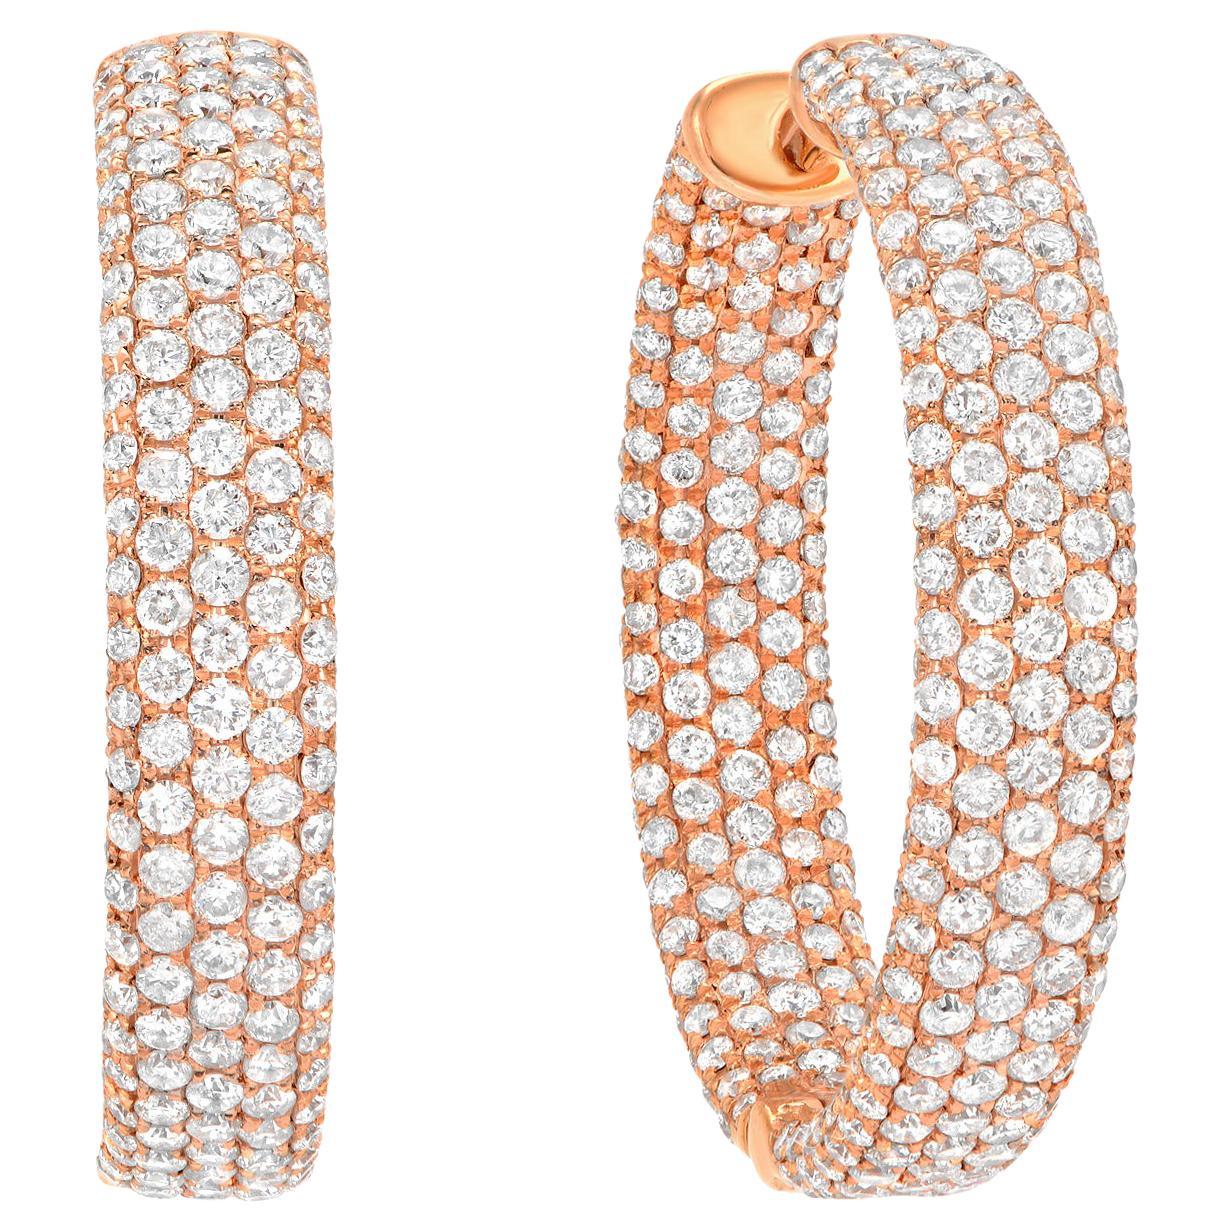 Diamond hoop earrings micro set with a total of 3.47 carats of round brilliant diamonds, inside-out, in these classical 18K rose gold diamond hoop earrings.
Diameter - 1 inch.
Returns are accepted and paid by us within 7 days of delivery.